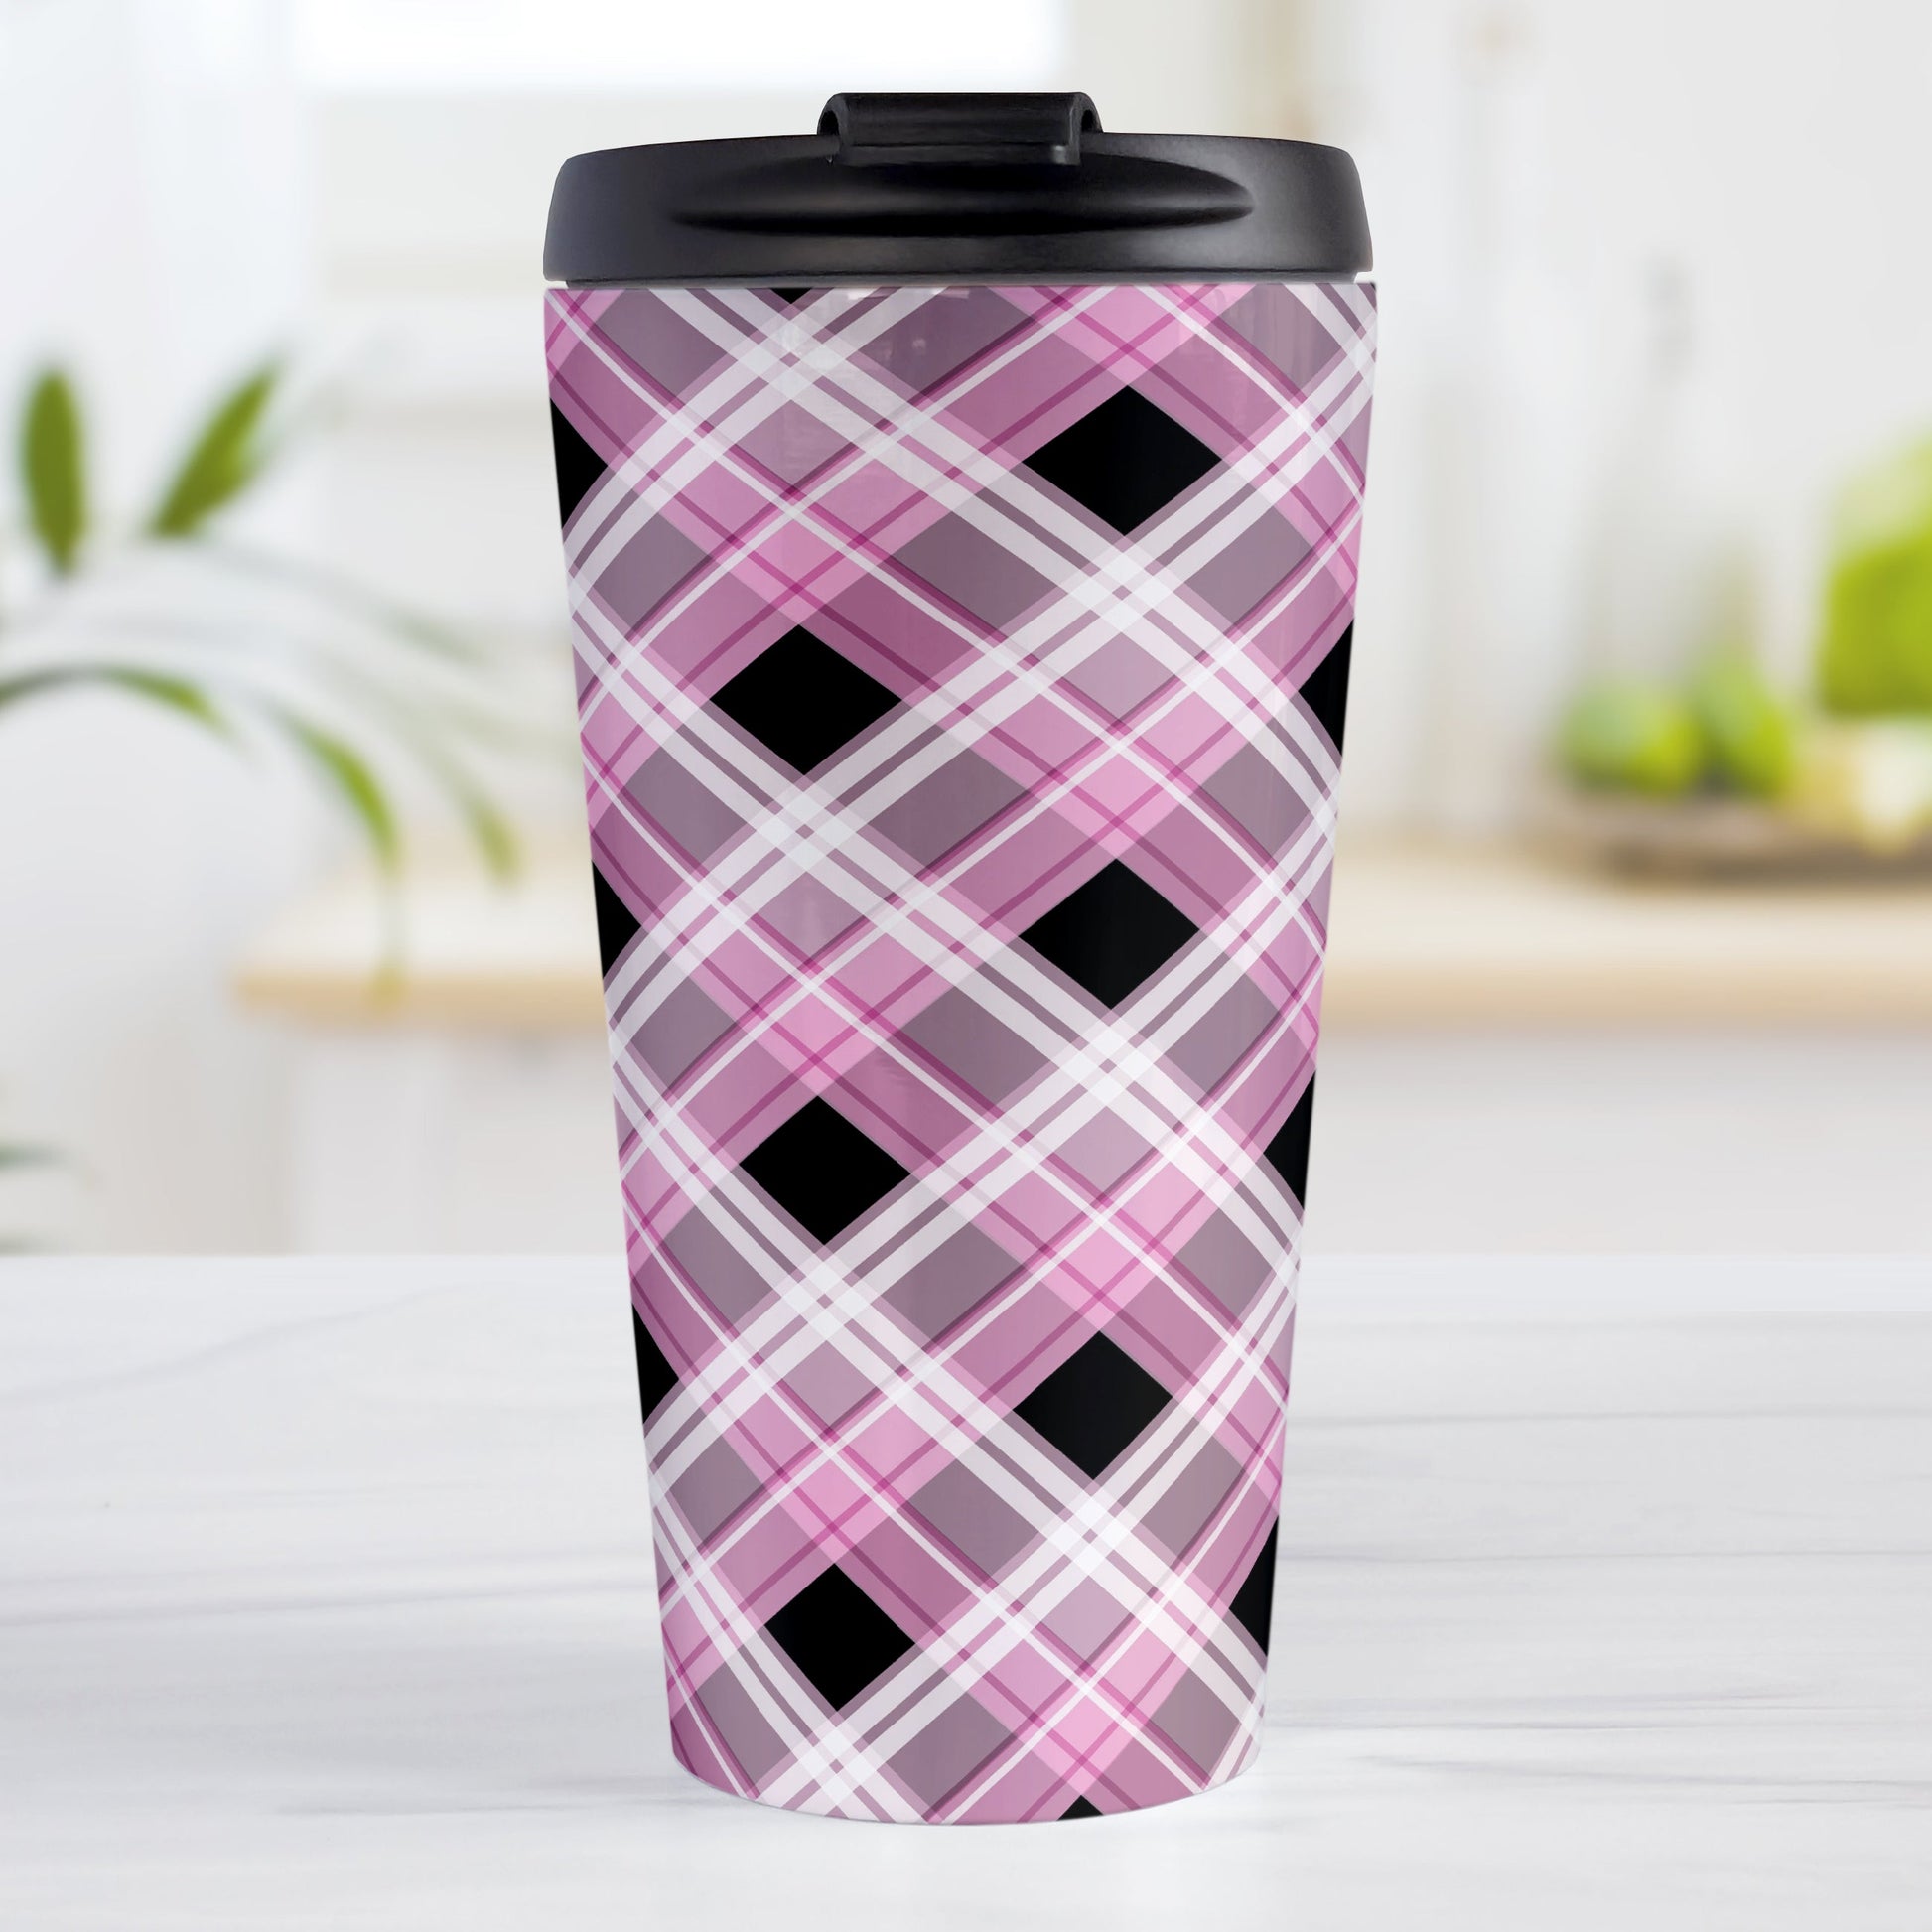 Alternative Pink Plaid Travel Mug (15oz) at Amy's Coffee Mugs. A stainless steel travel mug designed with a diagonal pink, black, and white plaid pattern that wraps around the mug. Designed for someone who likes plaid patterns and loves the color pink.